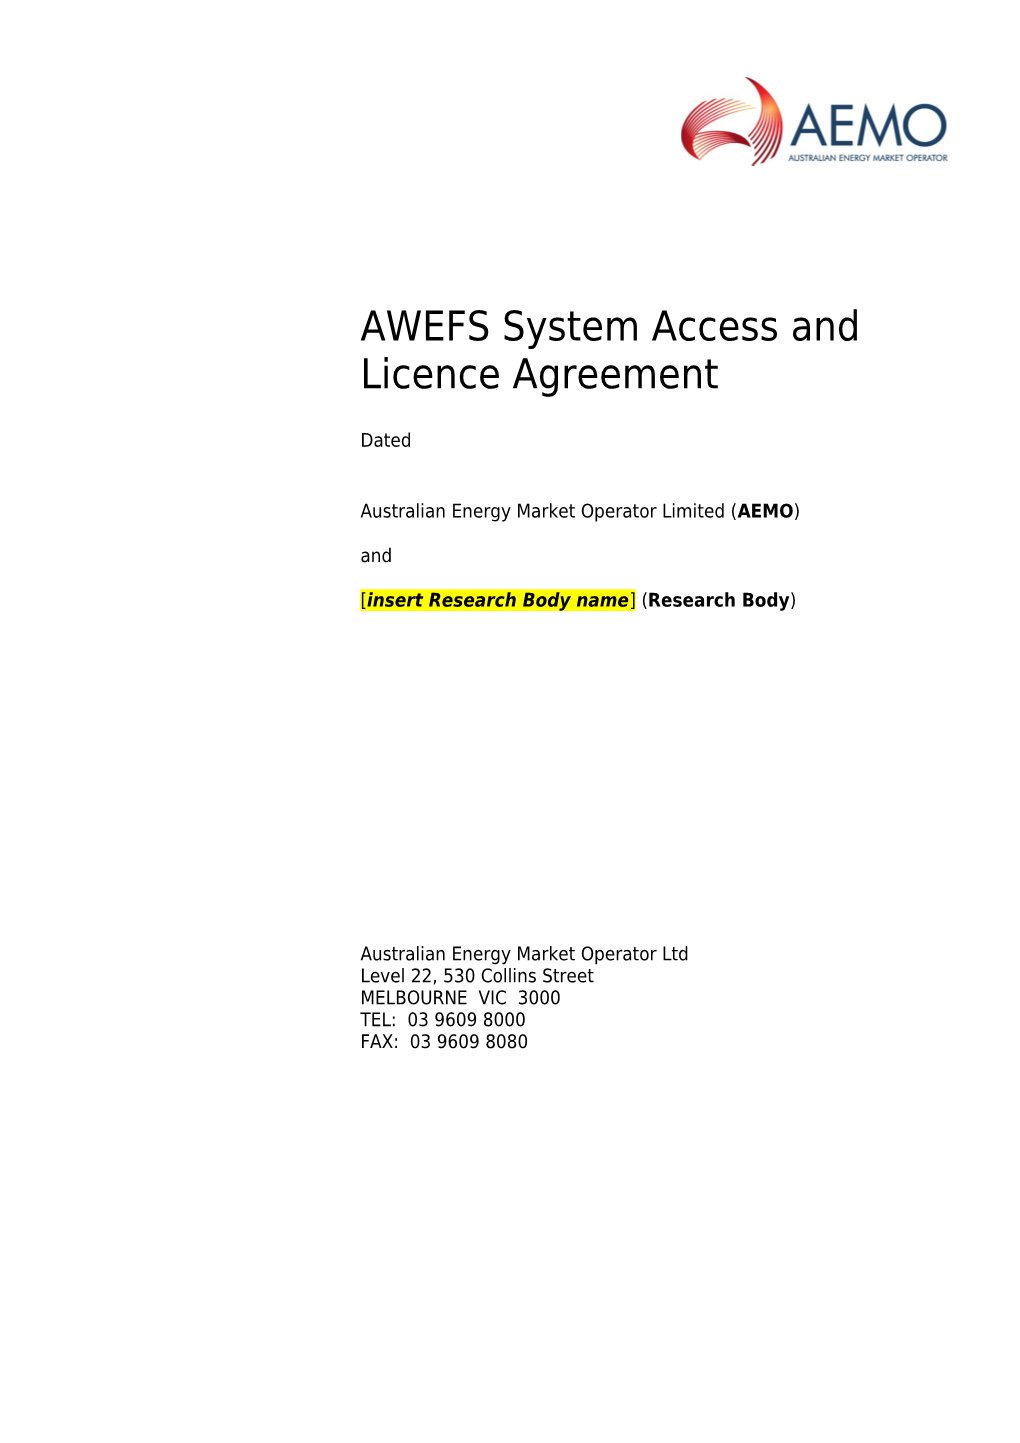 AWEFS System Access and Licence Agreement